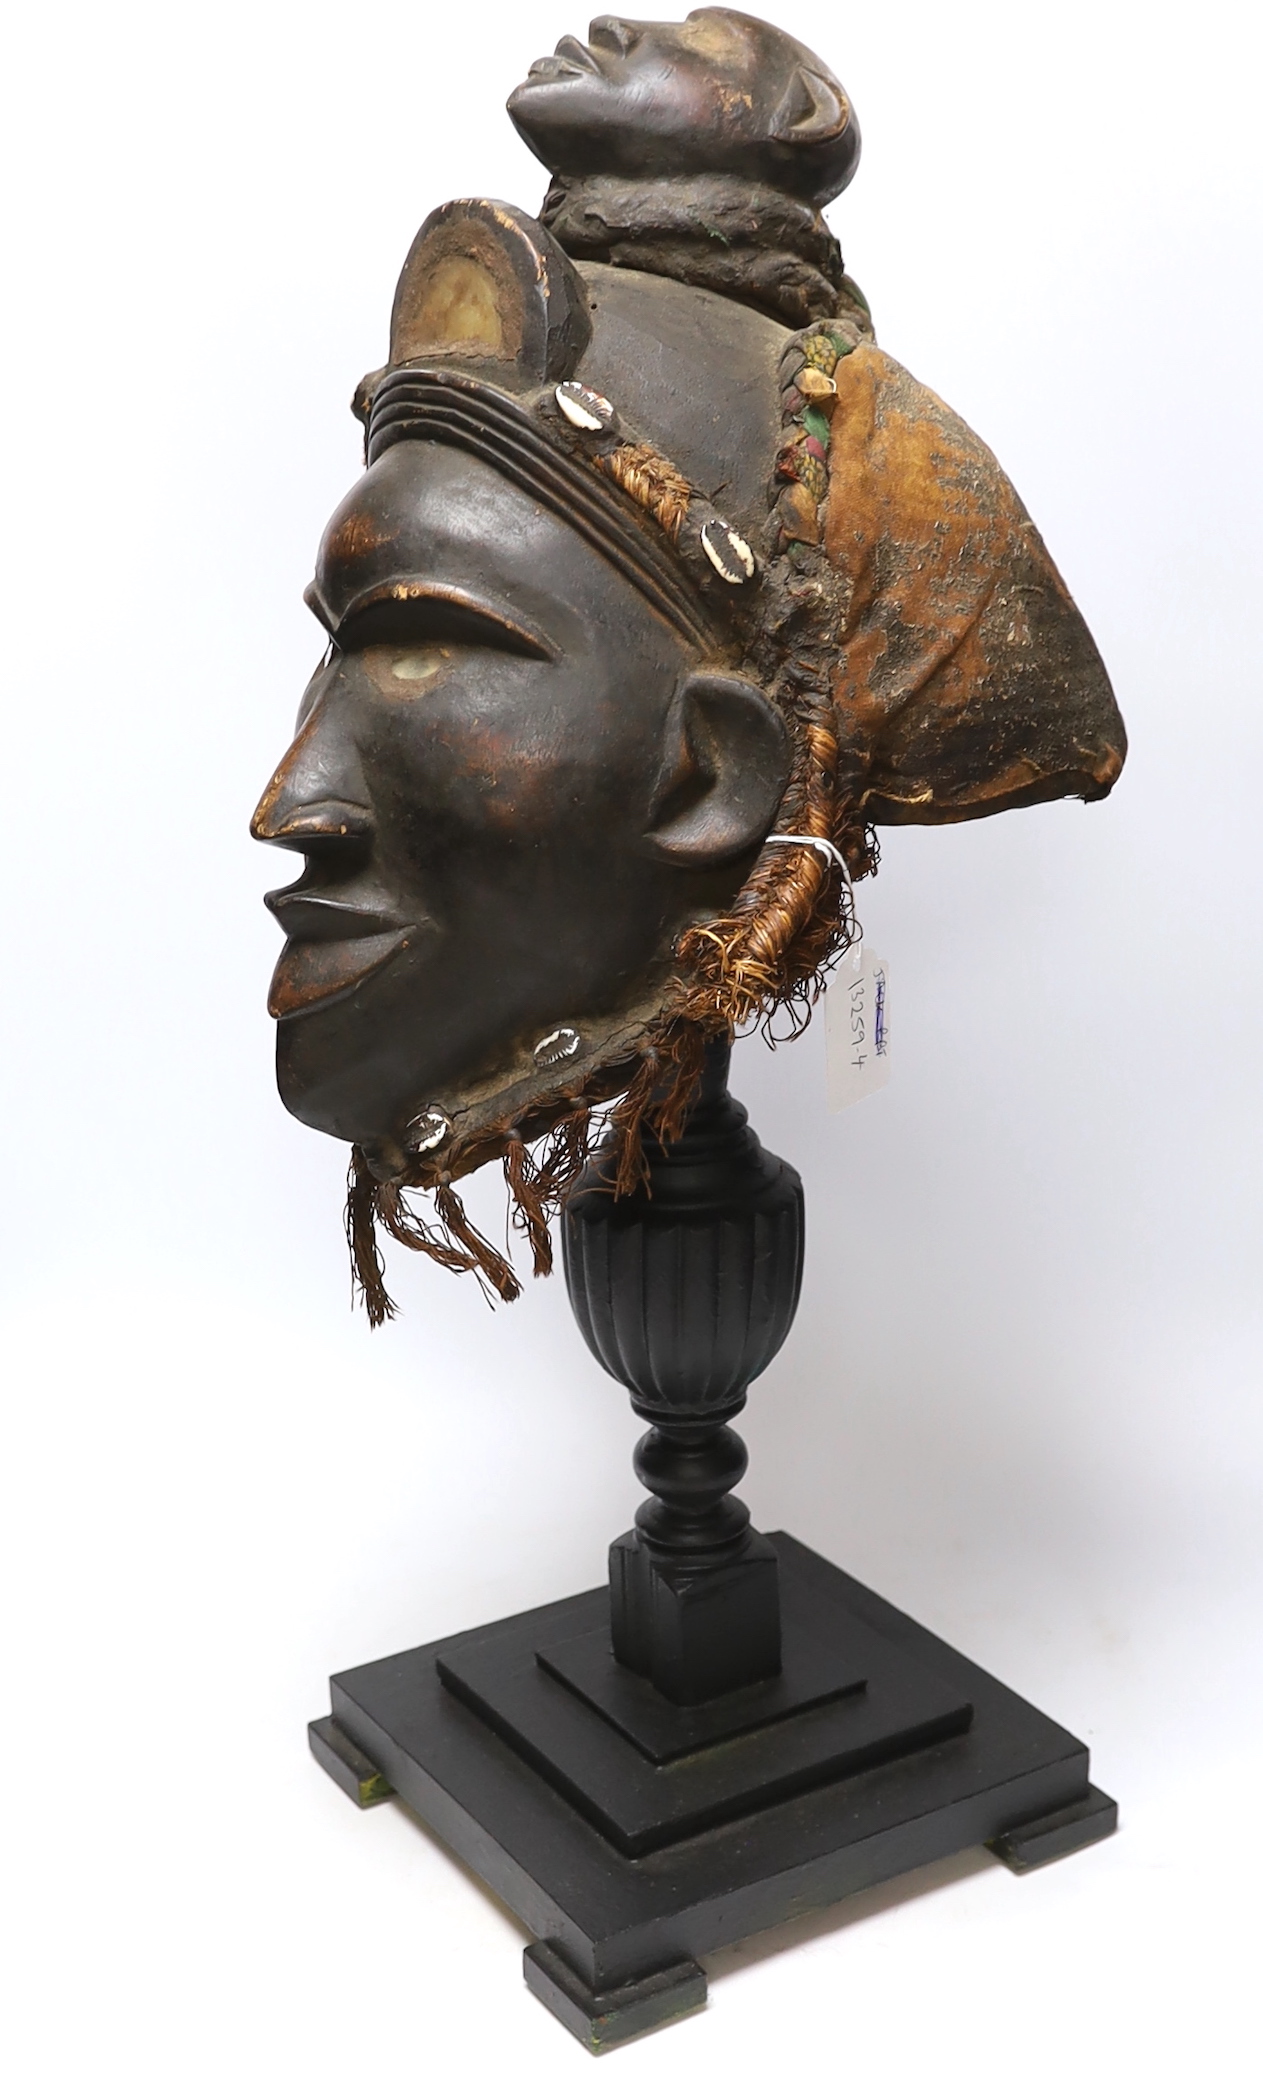 A West African carved wood helmet mask, possibly Kuba (Democratic Republic of Congo), with applied shells and glass inserts, on hardwood stand